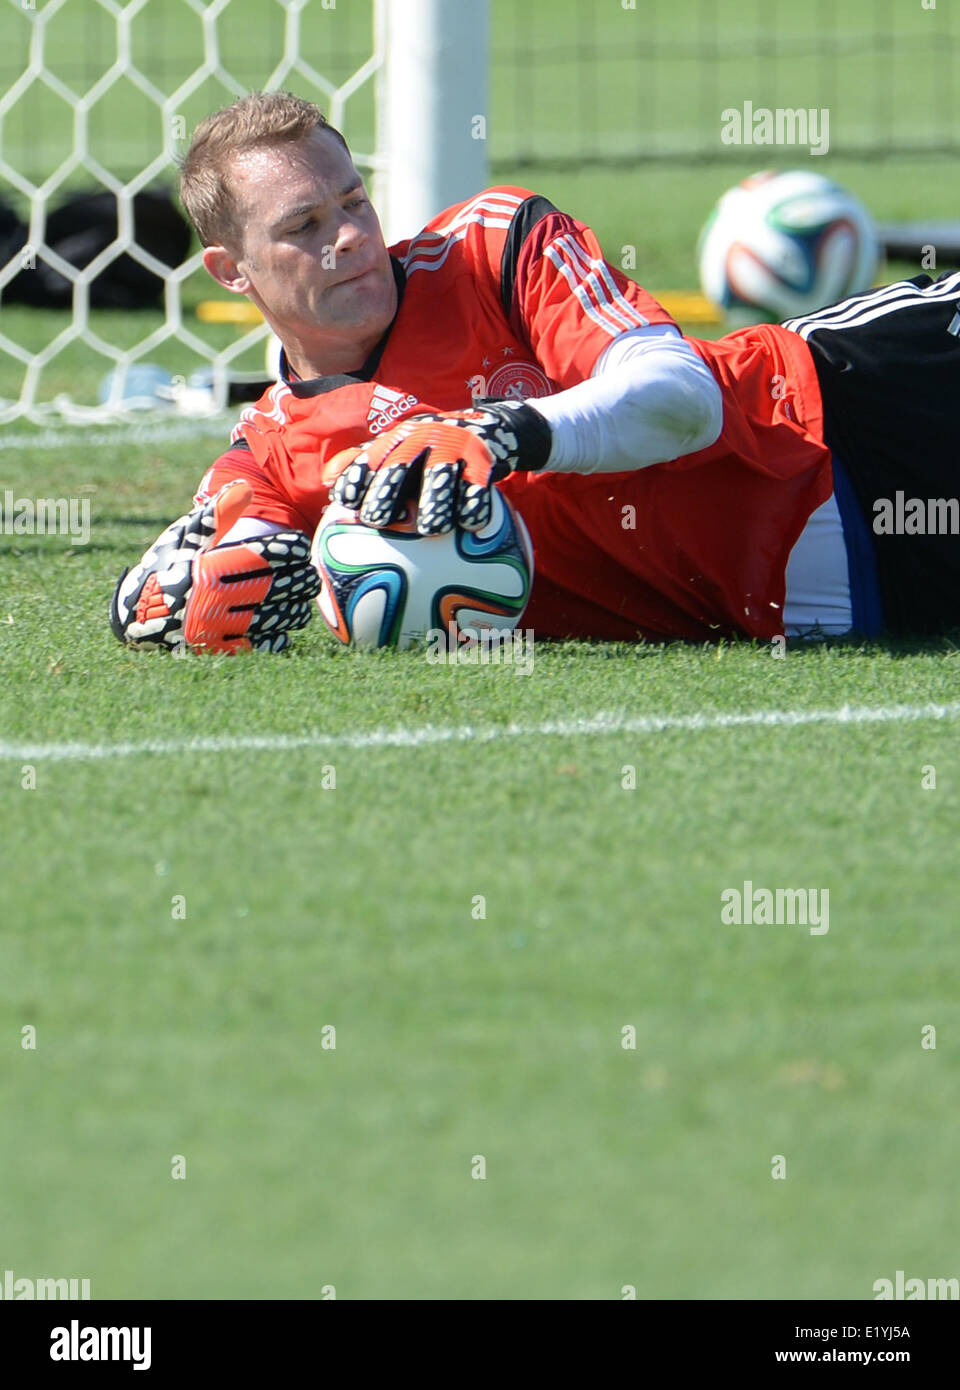 Goalkeeper Manuel Neuer of the German national soccer team in action during a training session in Santo Andre in Brazil, 11 June 2014. The FIFA World Cup 2014 will take place in Brazil from 12 June to 13 July 2014. Photo: Andreas Gebert/dpa Stock Photo